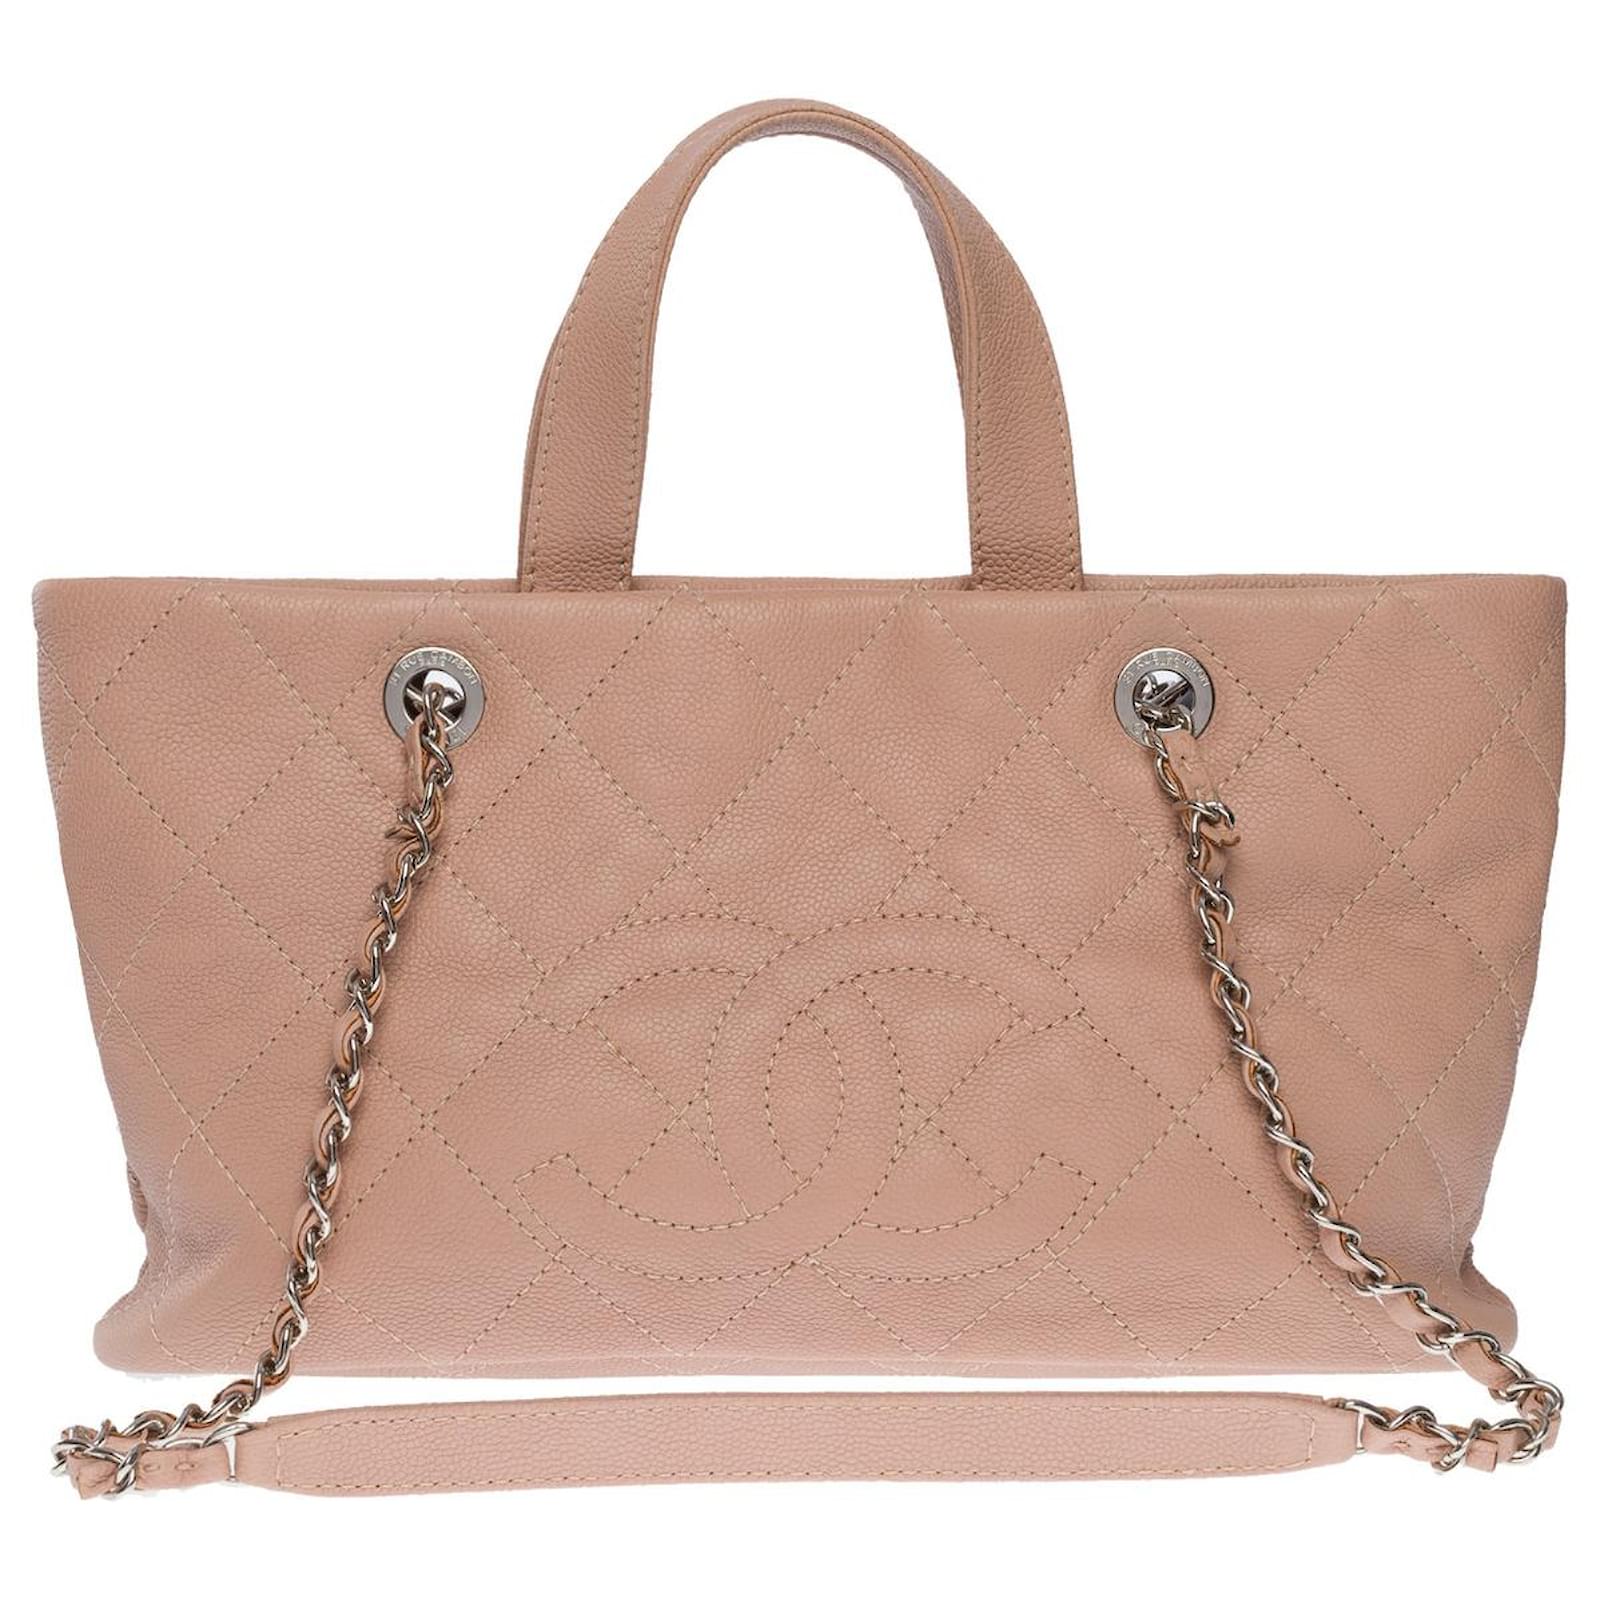 Totes Chanel Mini Shopping Tote Bag in Pink Caviar Leather